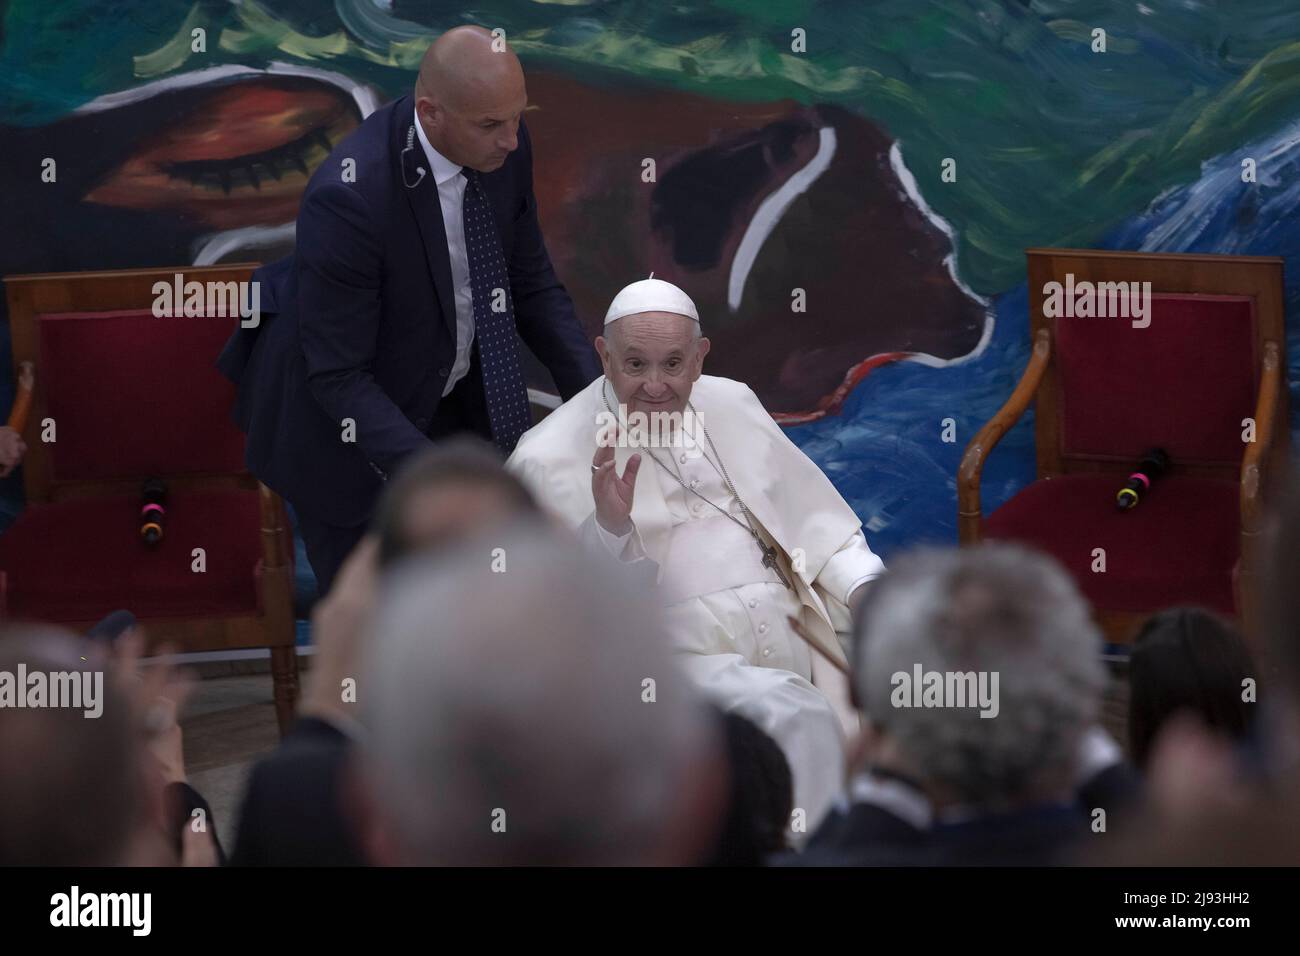 Rome, Italy. 19 May 2022. Pope Francis arrives for the launch of the 'Scholas Occurrentes', international educational movement at the Pontifical Urbaniana University. Credit: Maria Grazia Picciarella/Alamy Live News Stock Photo